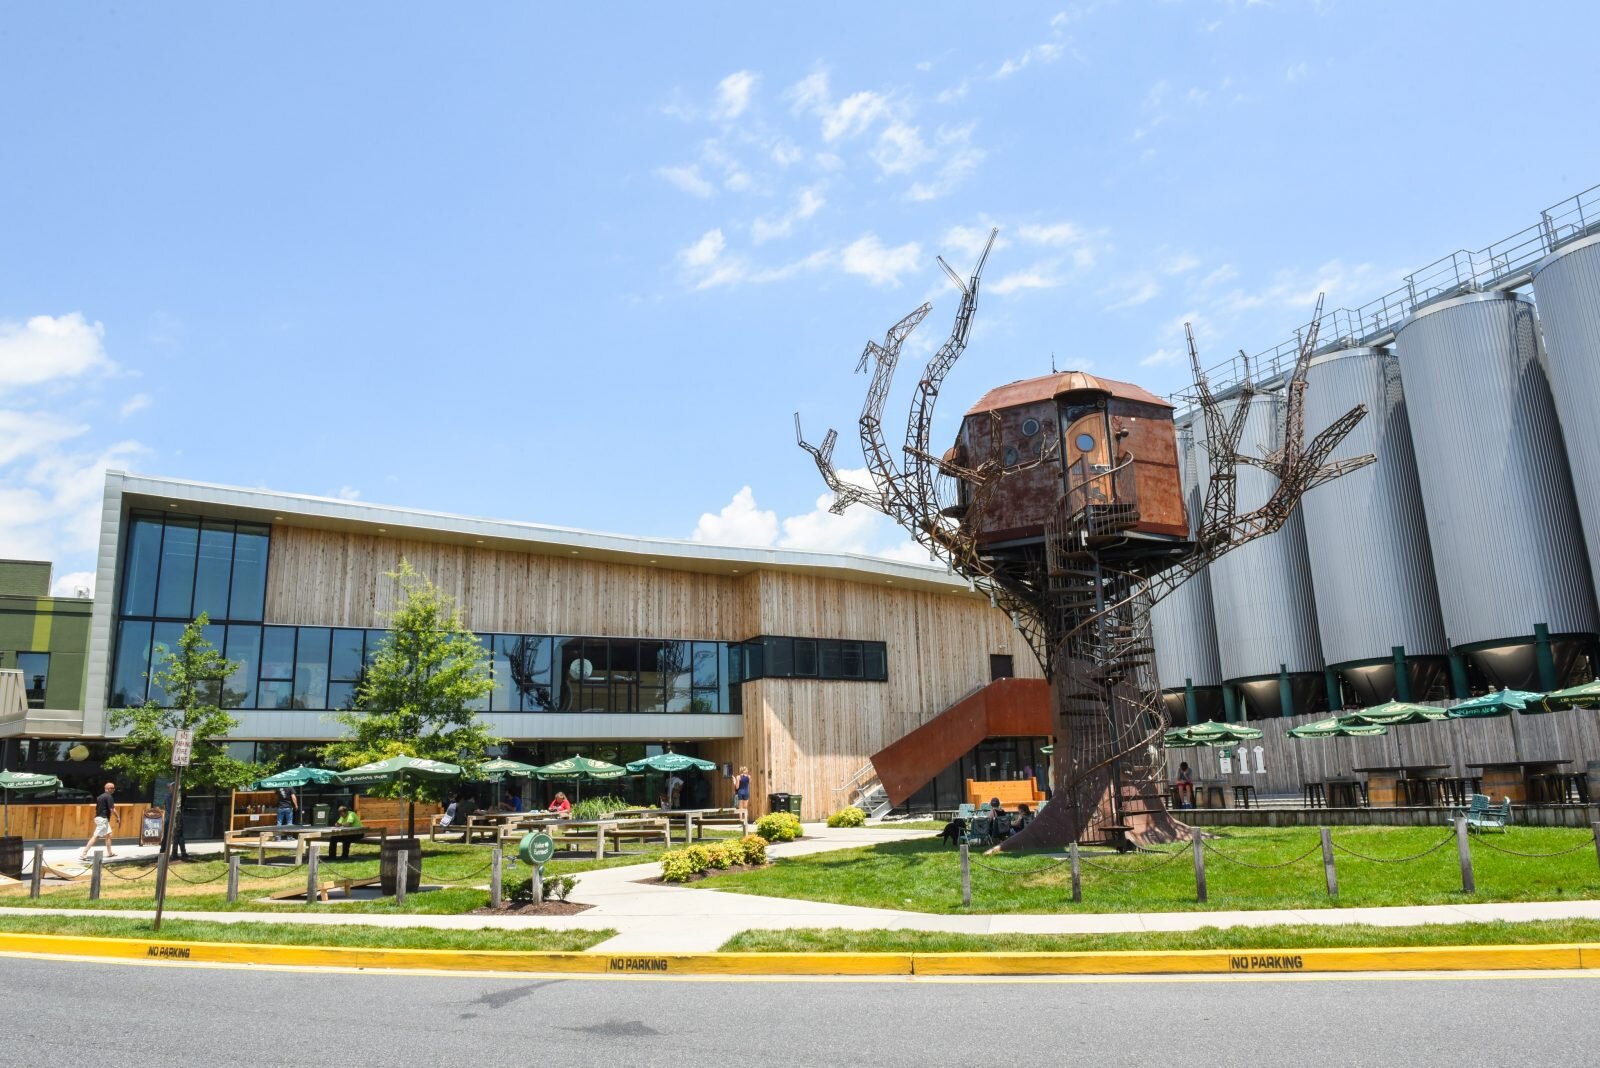 Dogfish Head Brewery exterior